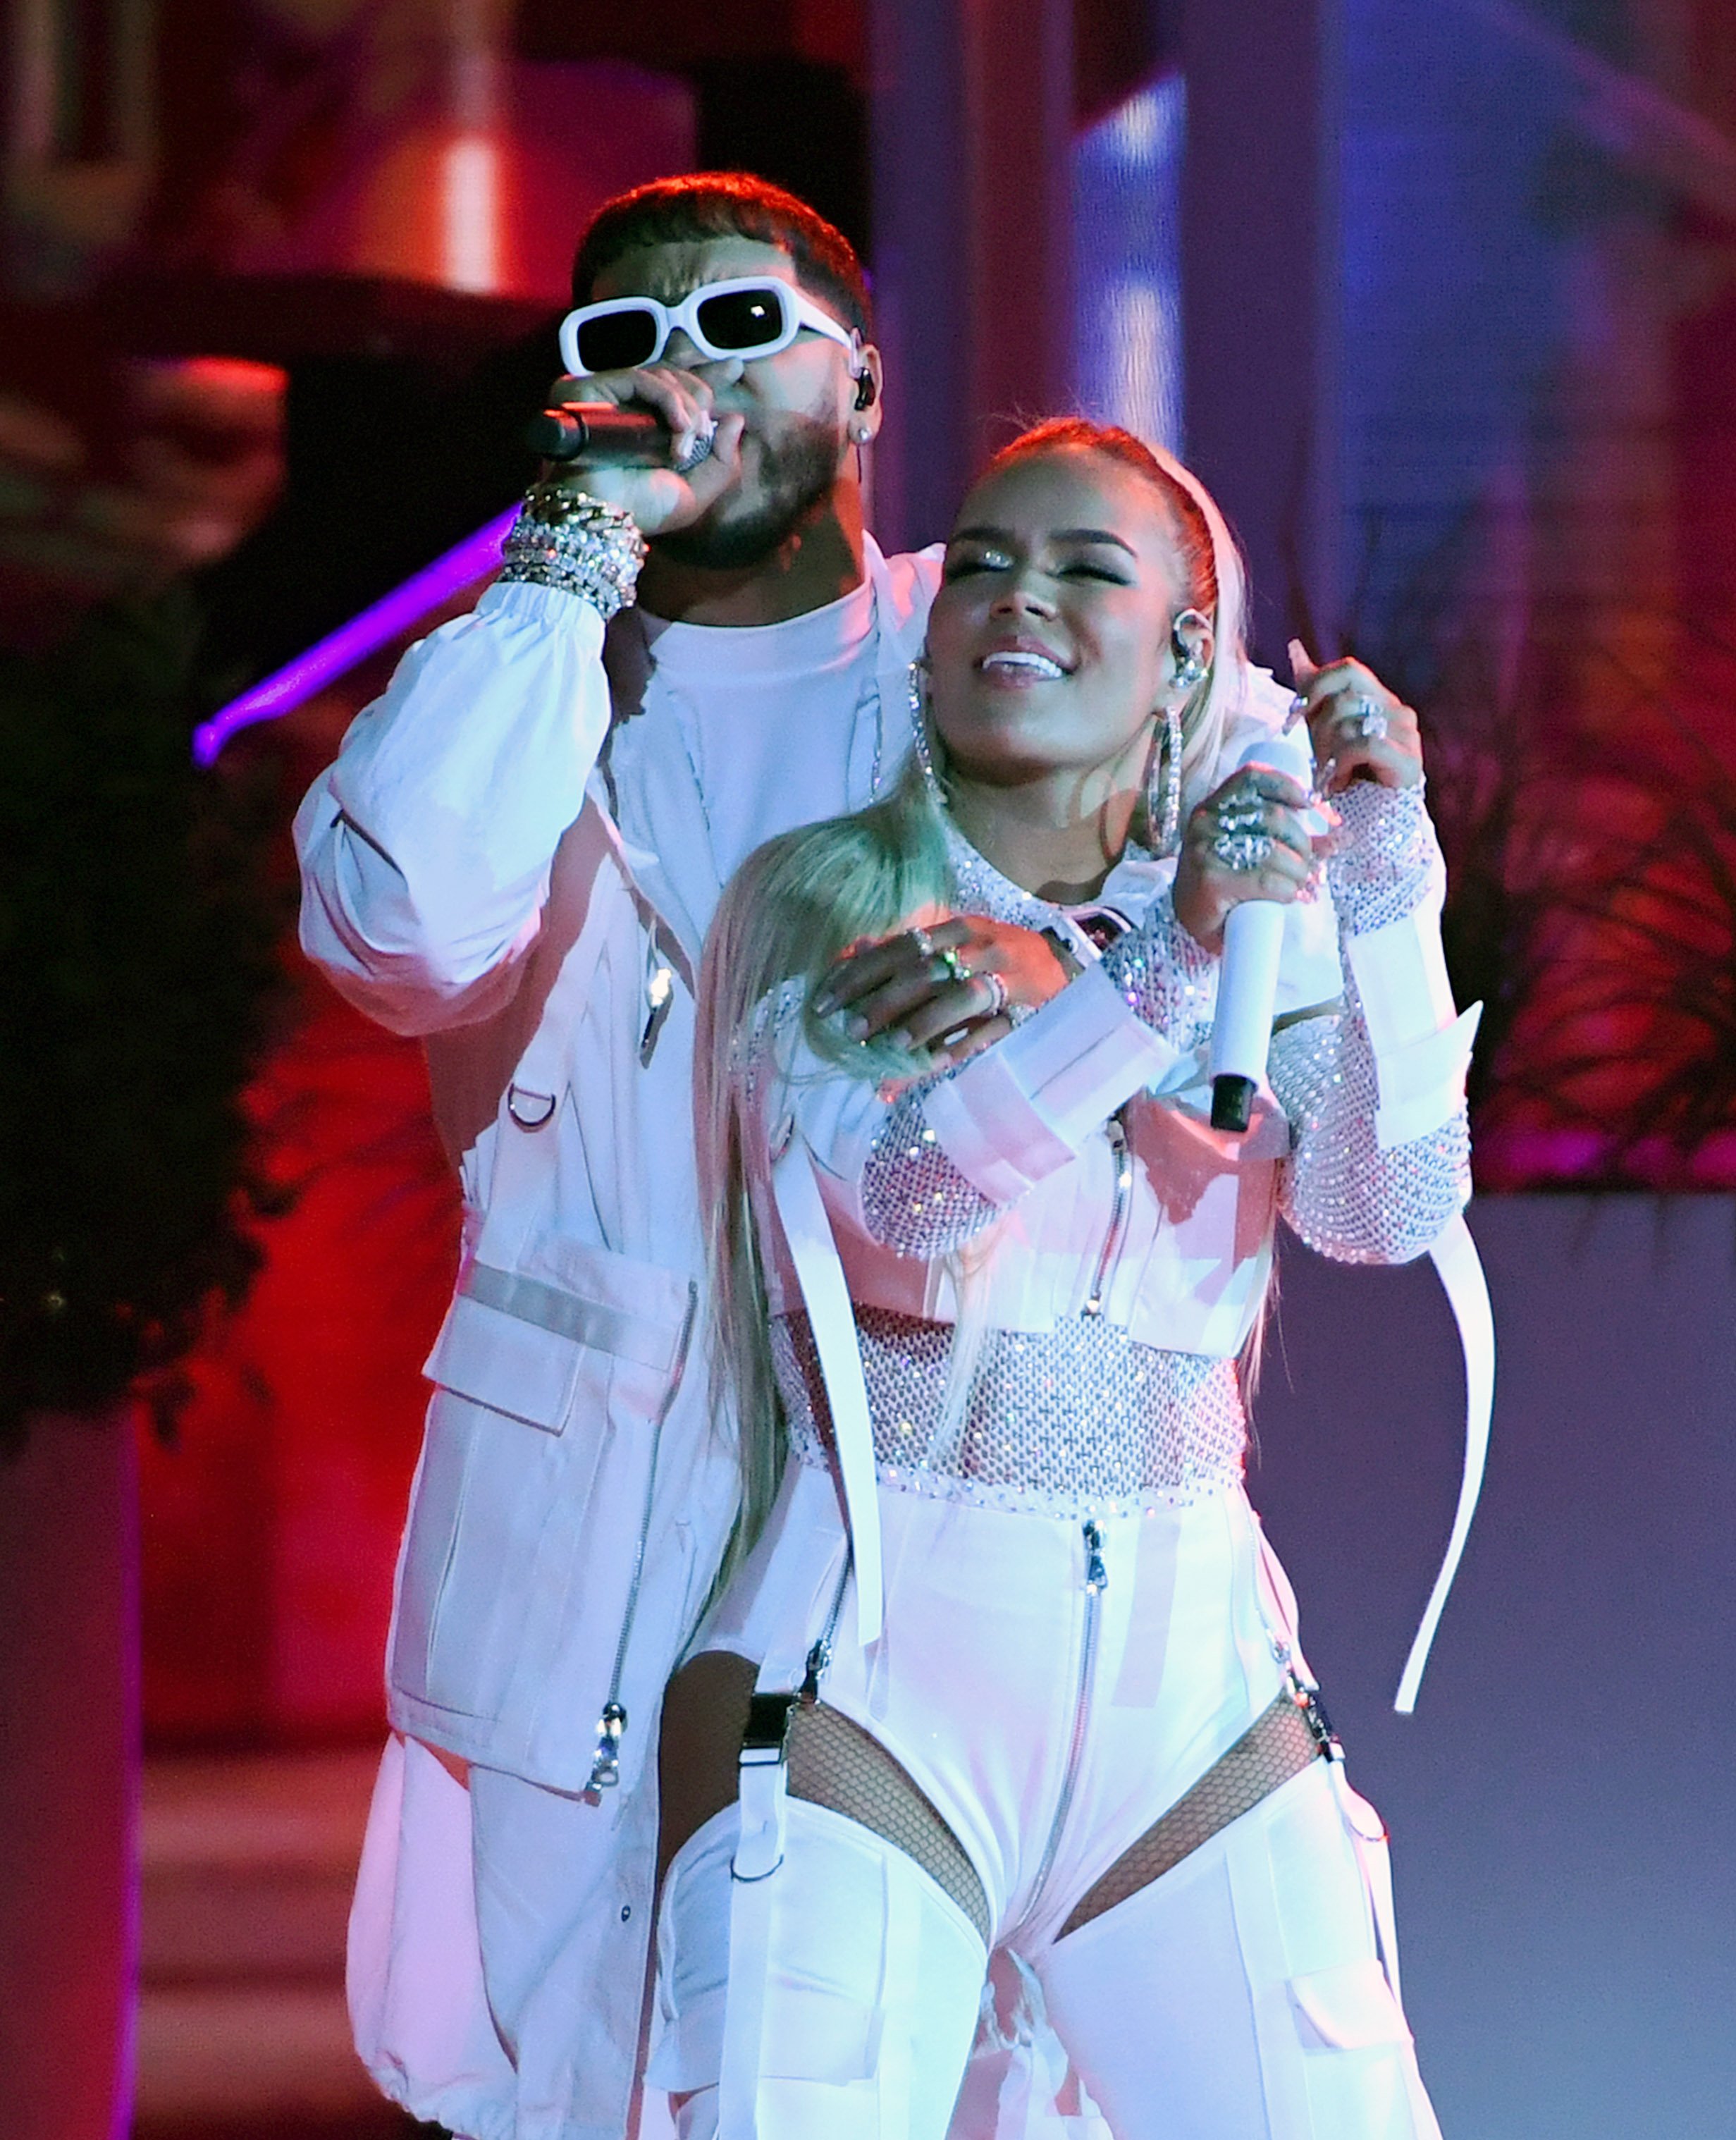 Karol G and Anuel AA are pictured performing on stage at the 2019 Billboard Latin Music Awards at the Mandalay Bay Resort and Casino on April 25, 2019, in Las Vegas, Nevada | Source: Getty Images